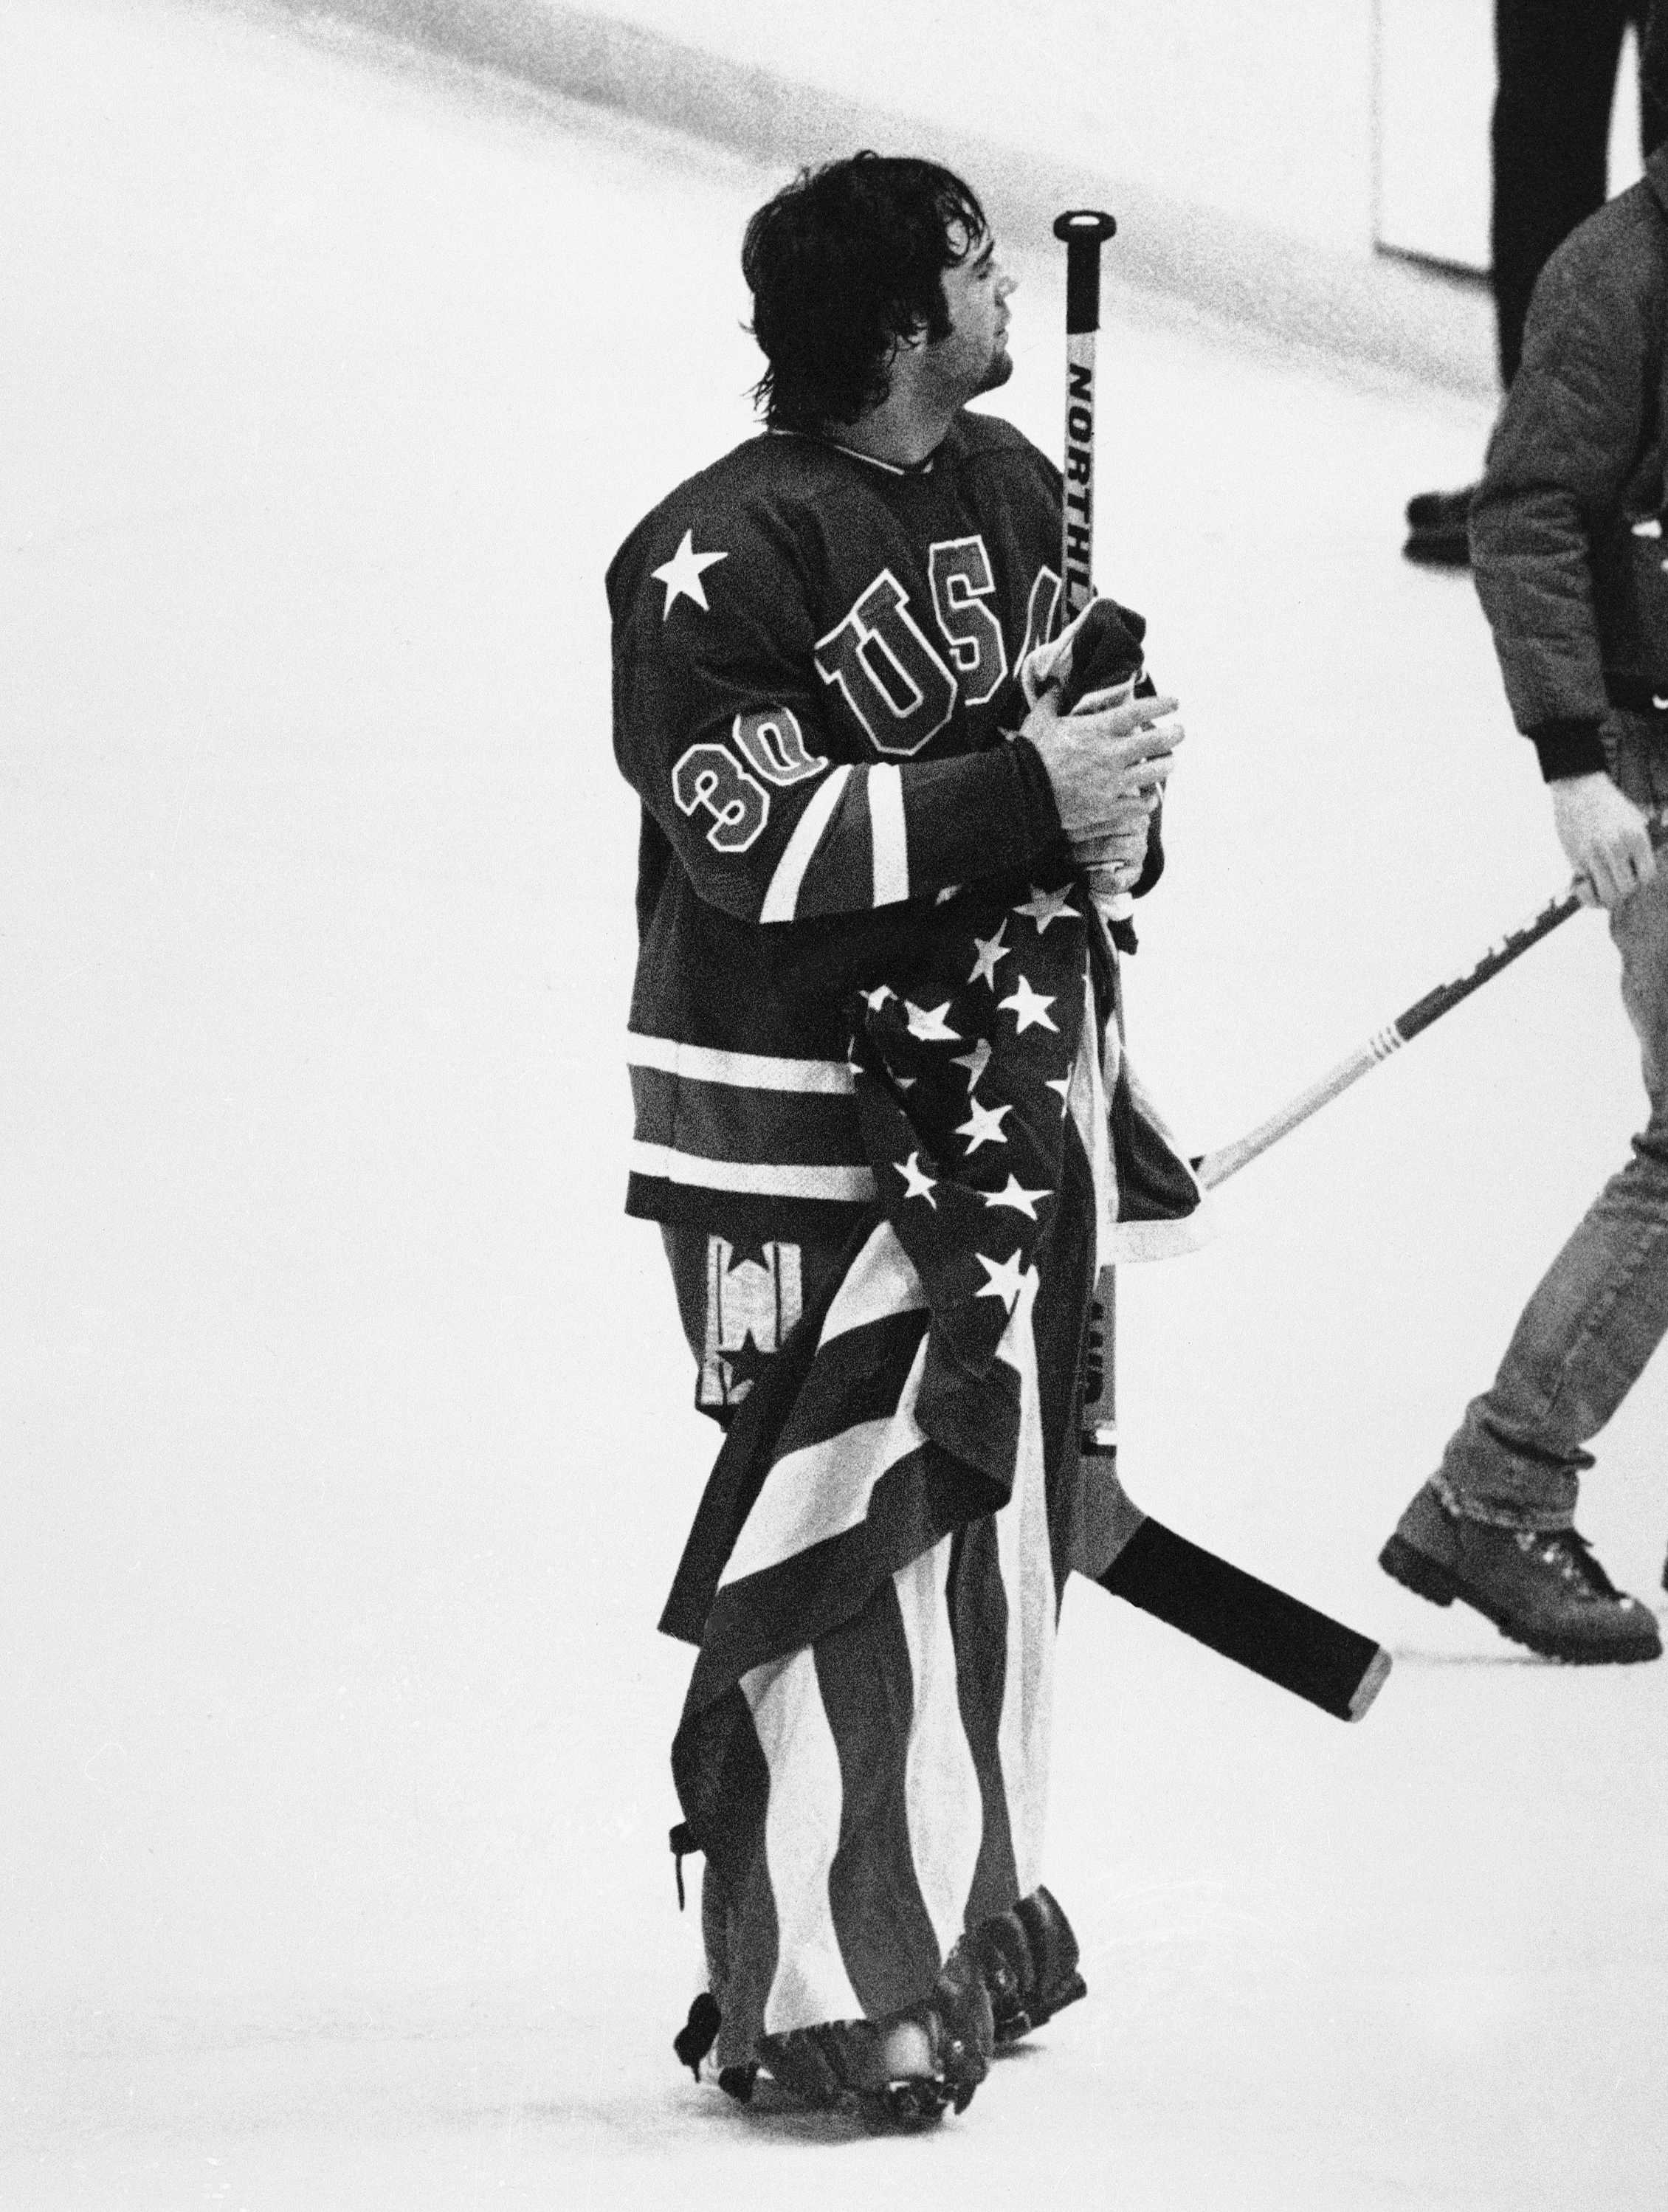 St. Pete's Jim Craig, Olympic hero, on the anniversary of the